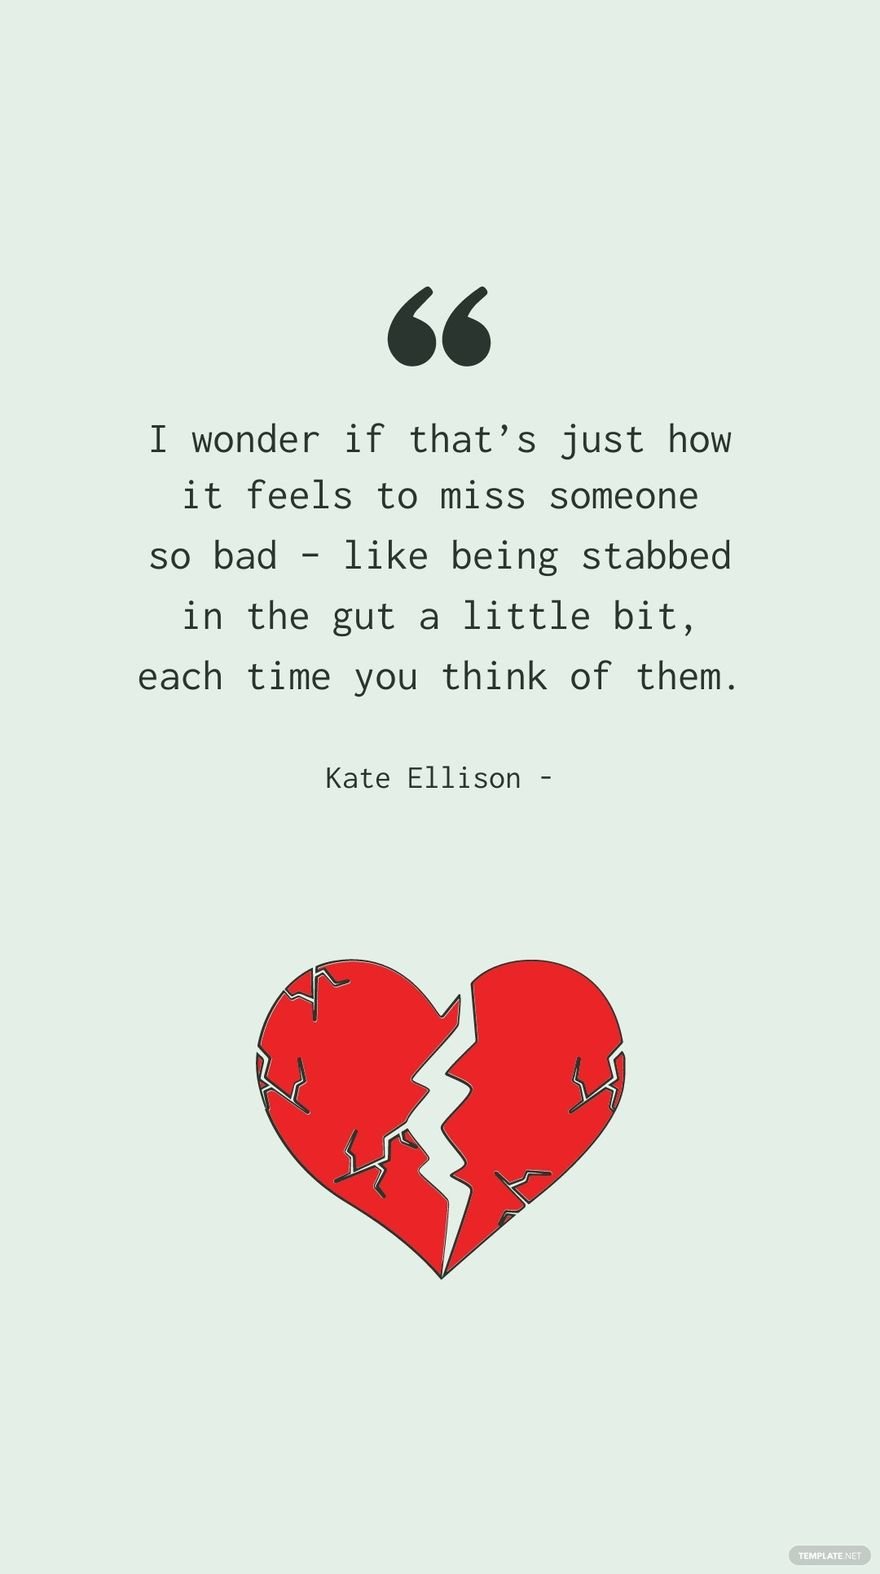 Free Kate Ellison - I wonder if that’s just how it feels to miss someone so bad – like being stabbed in the gut a little bit, each time you think of them. in JPG